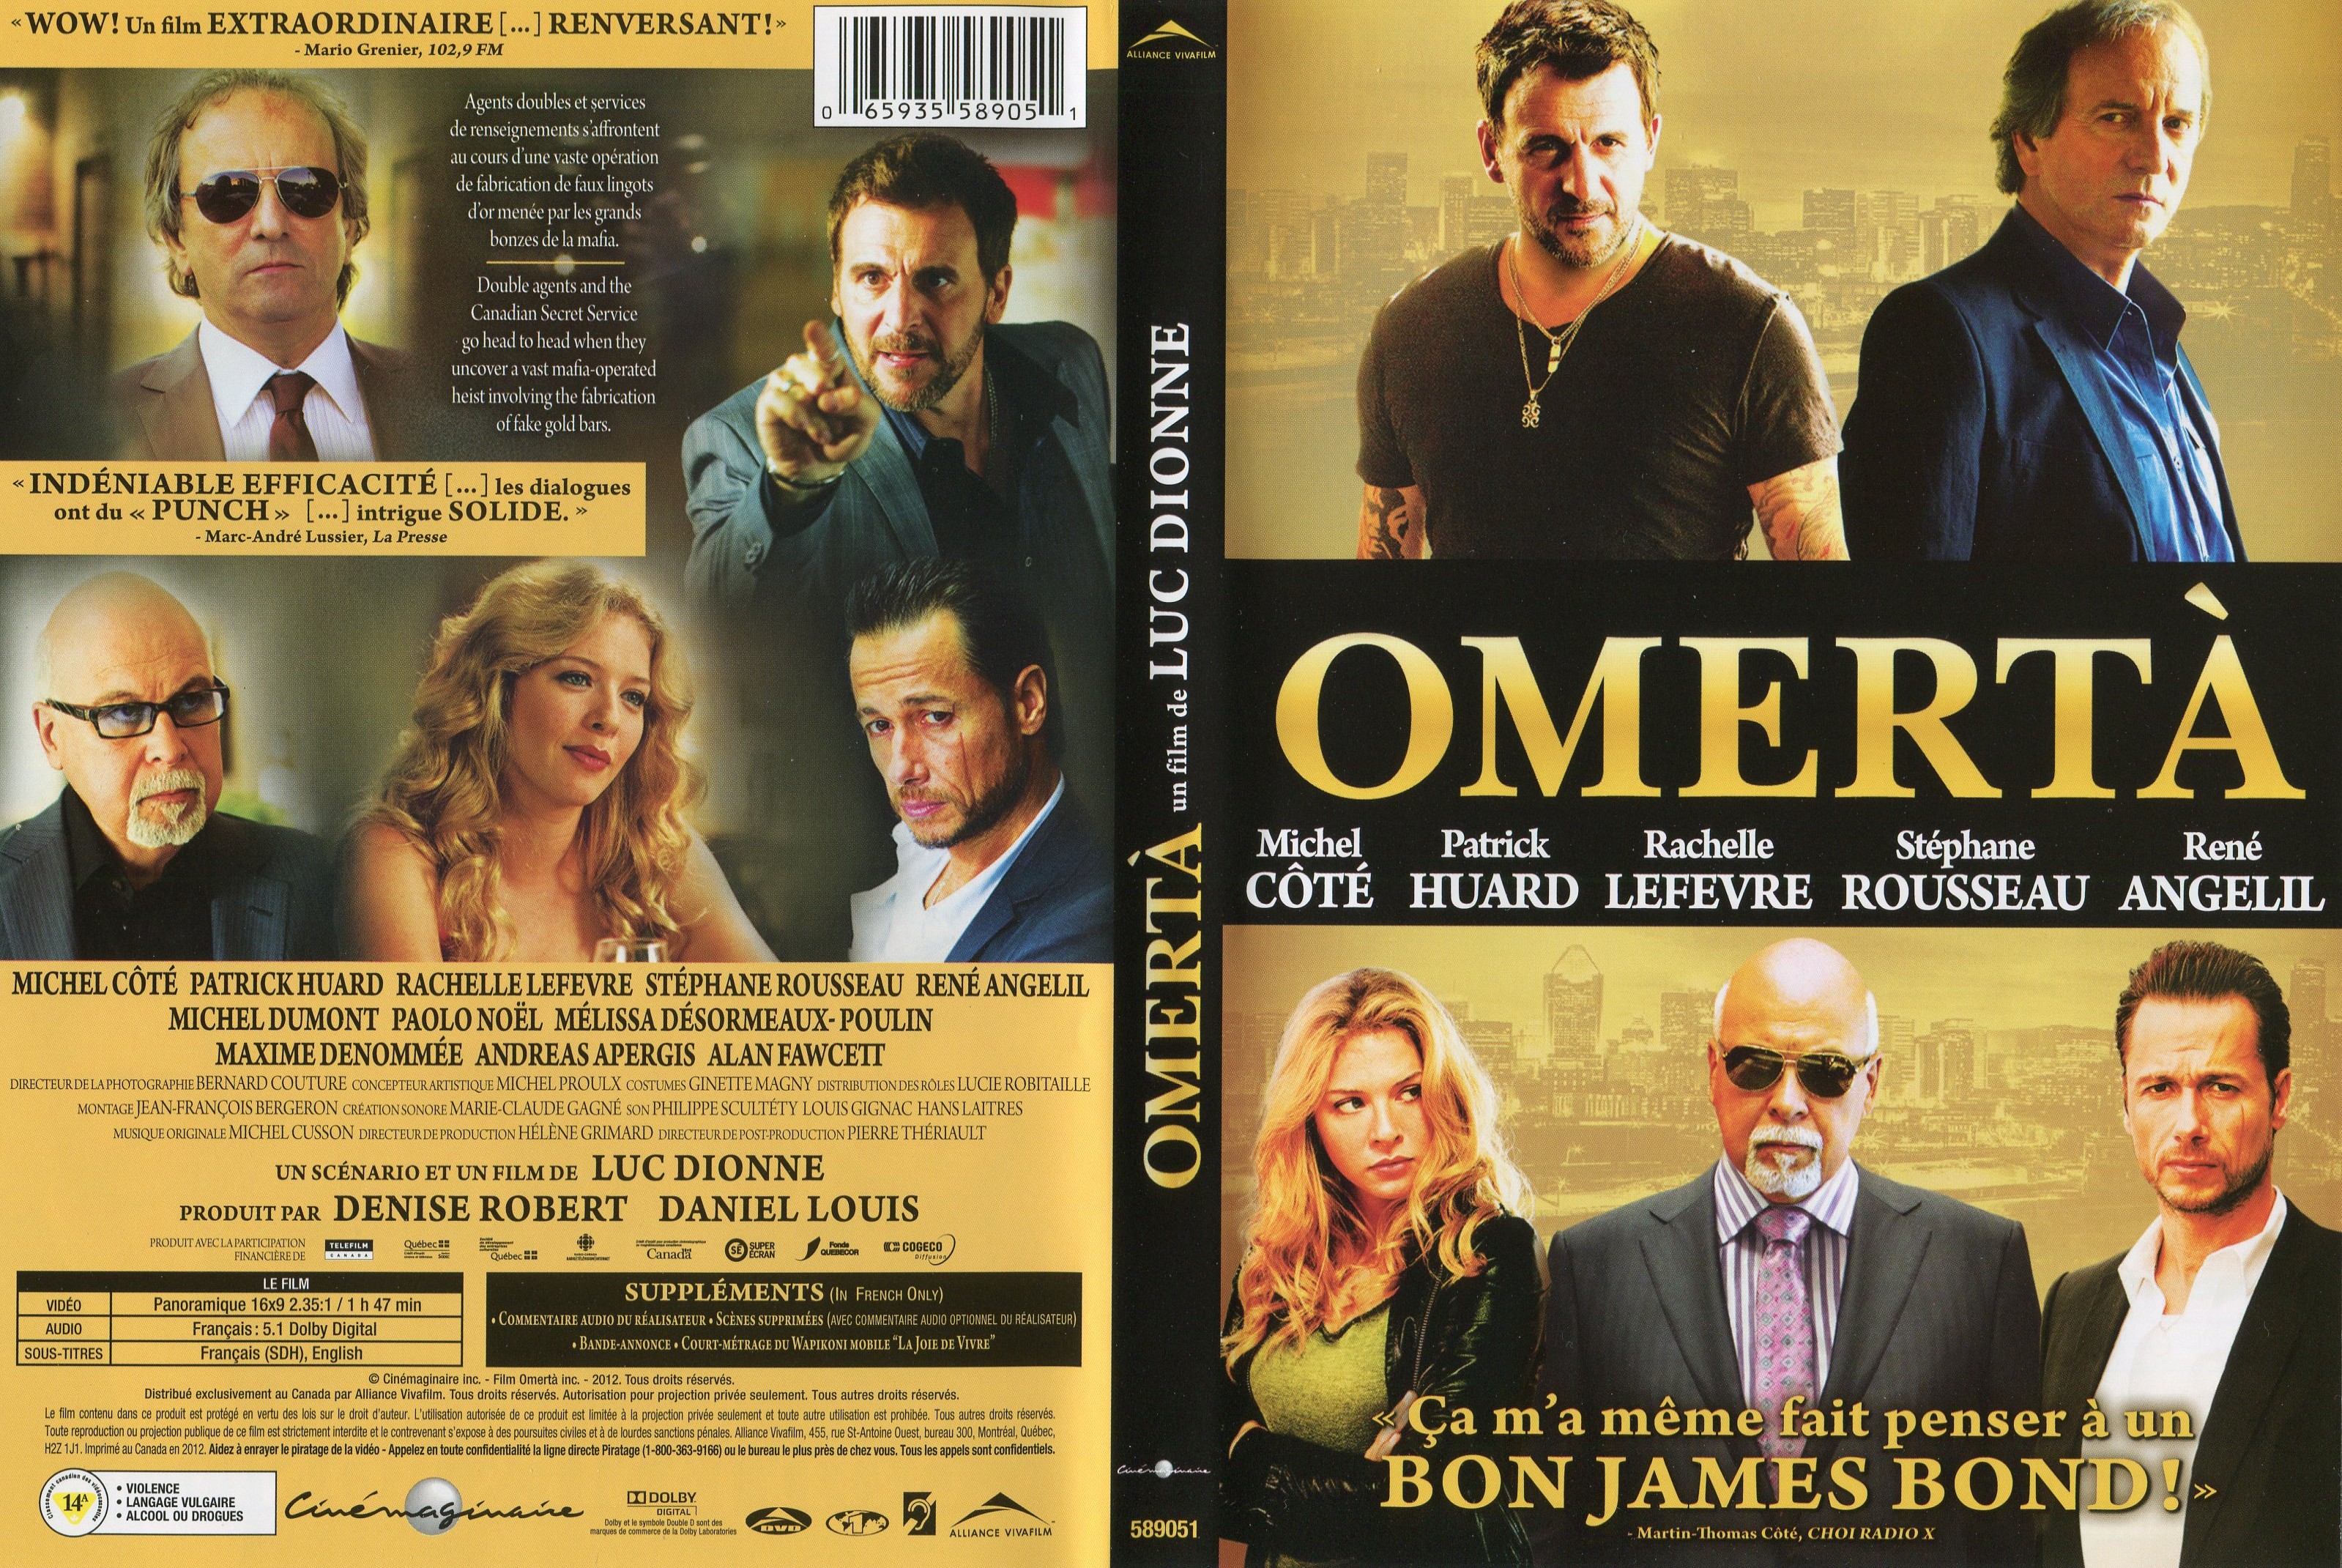 Jaquette DVD Omerta (Canadienne)